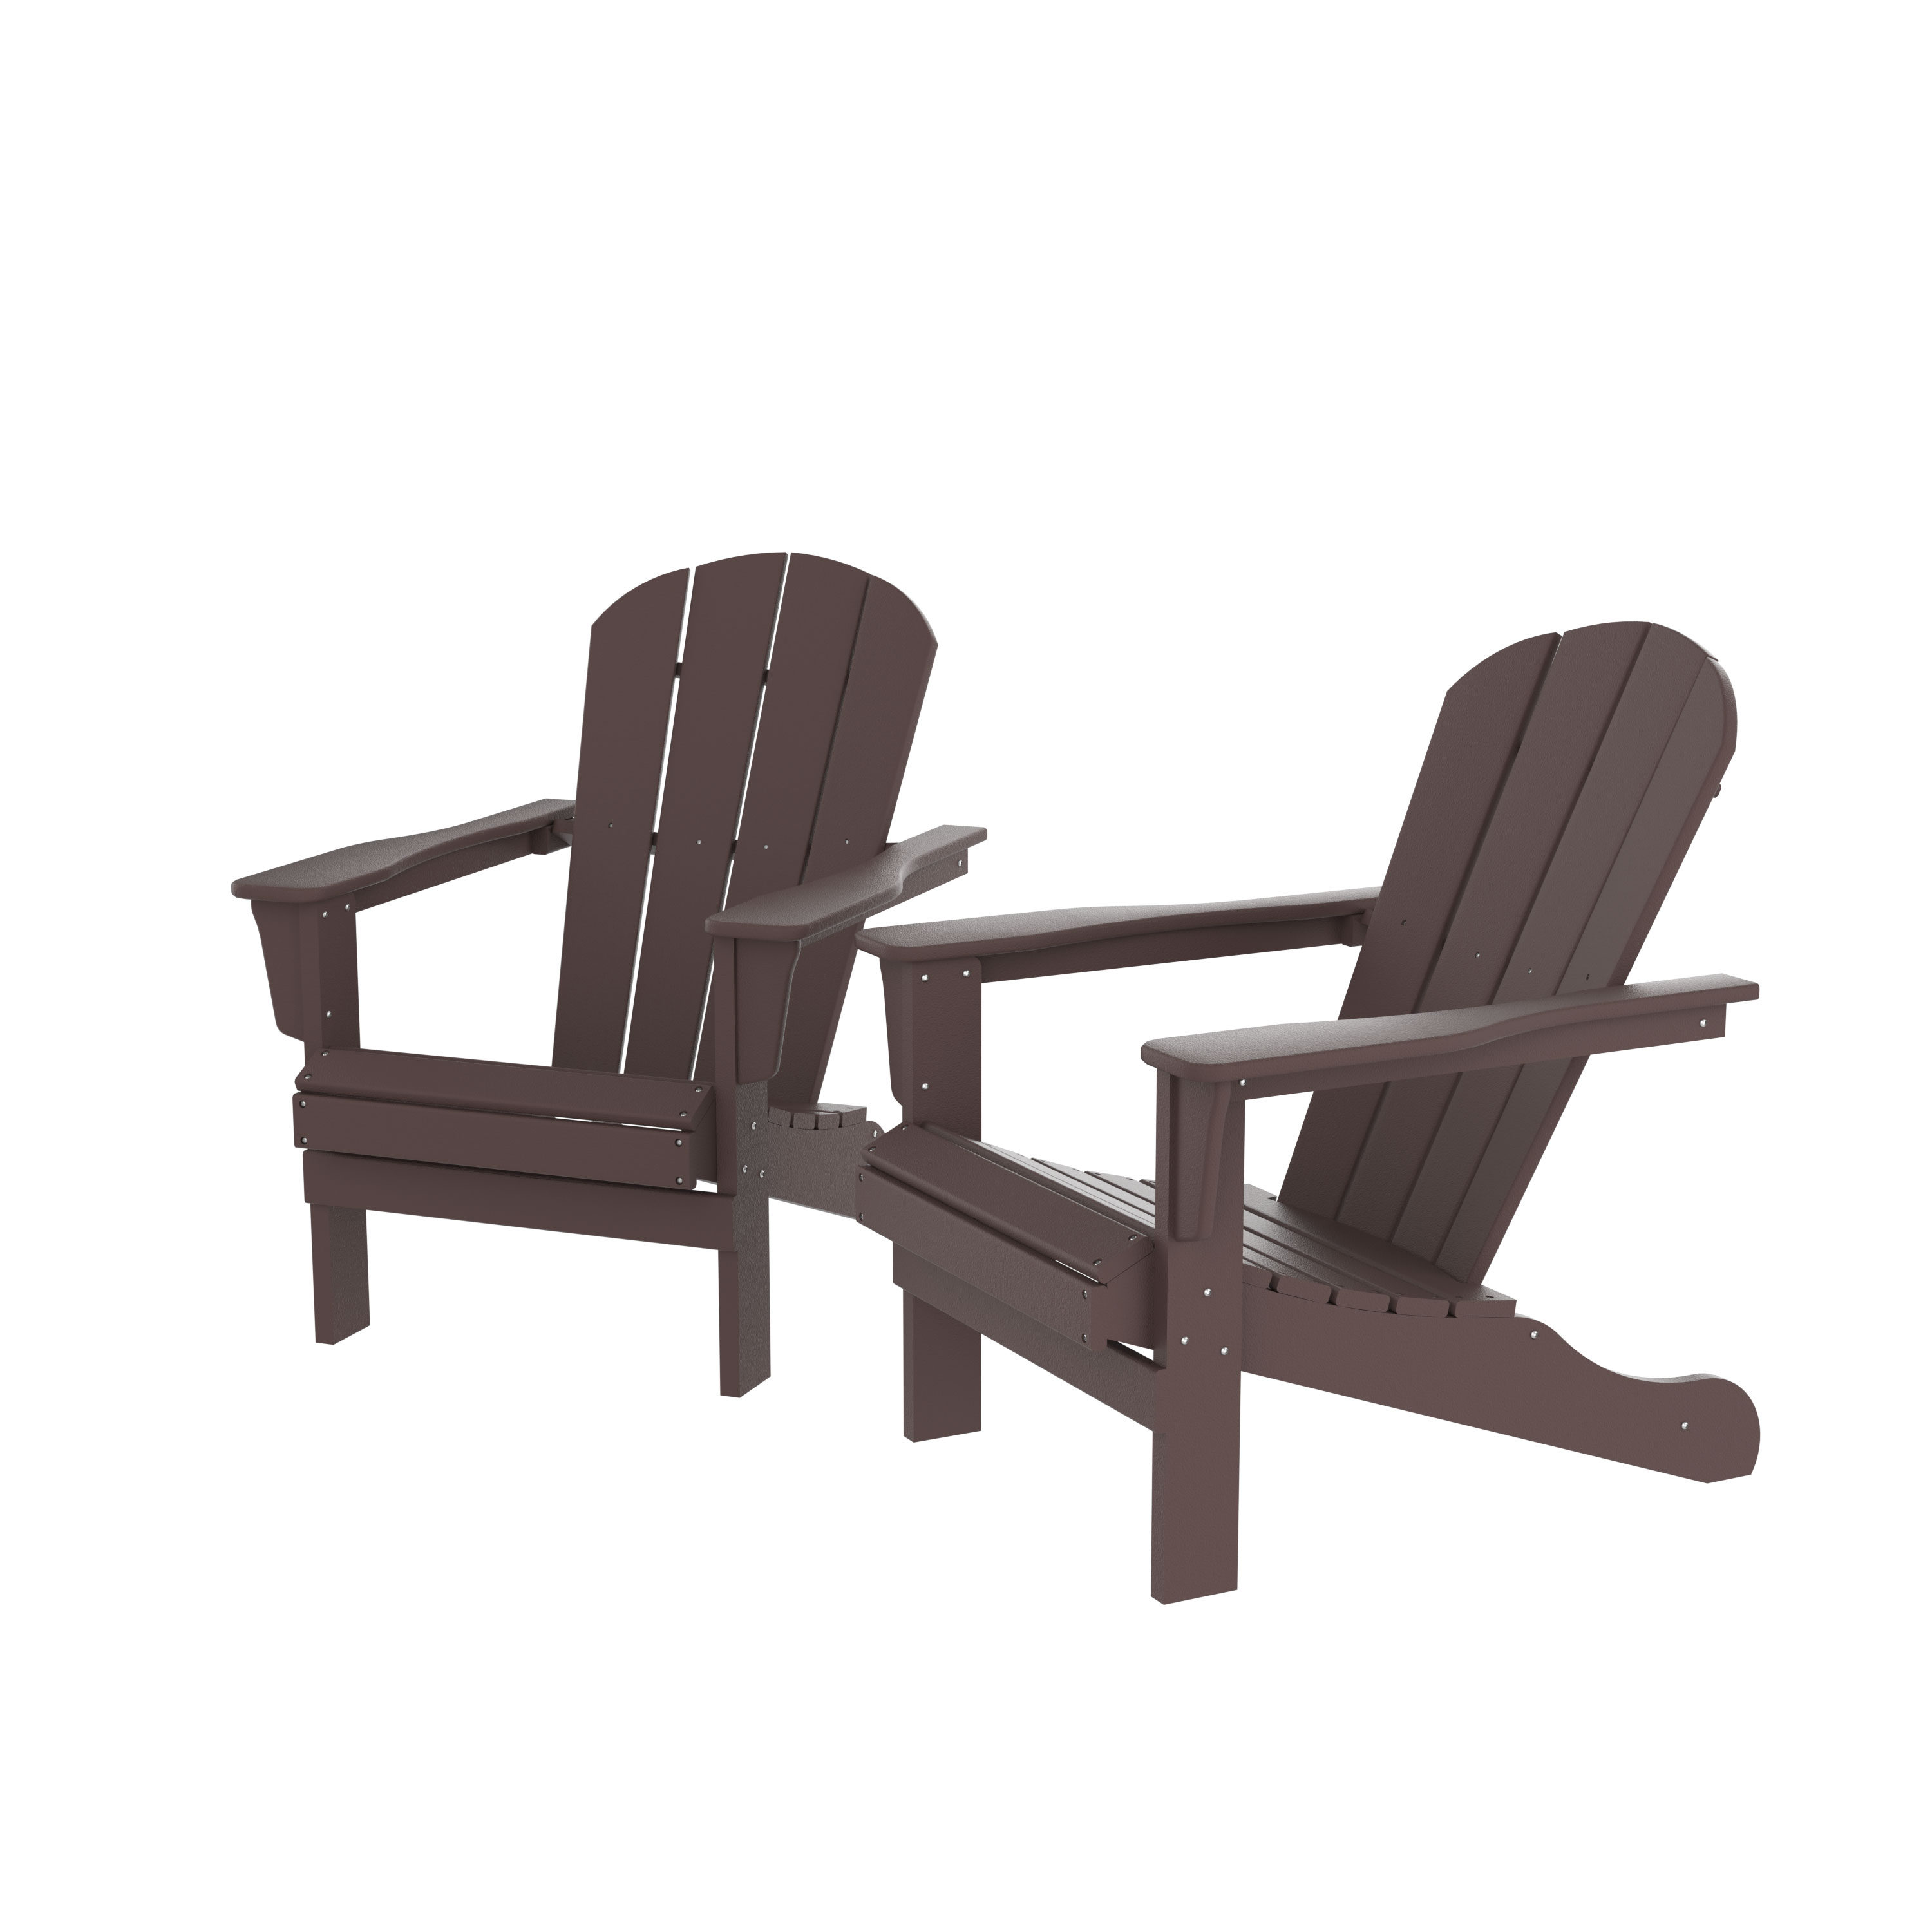 Hottest HDPE Adirondack Chair, Fire Pit Chairs, Sand Chair, Patio Outdoor Chairs,DPE Plastic Resin Deck Chair, lawn chairs, Adult Size ,Weather Resistant for Patio/ Backyard/Garden , Brown, Set of 2 - image 4 of 6